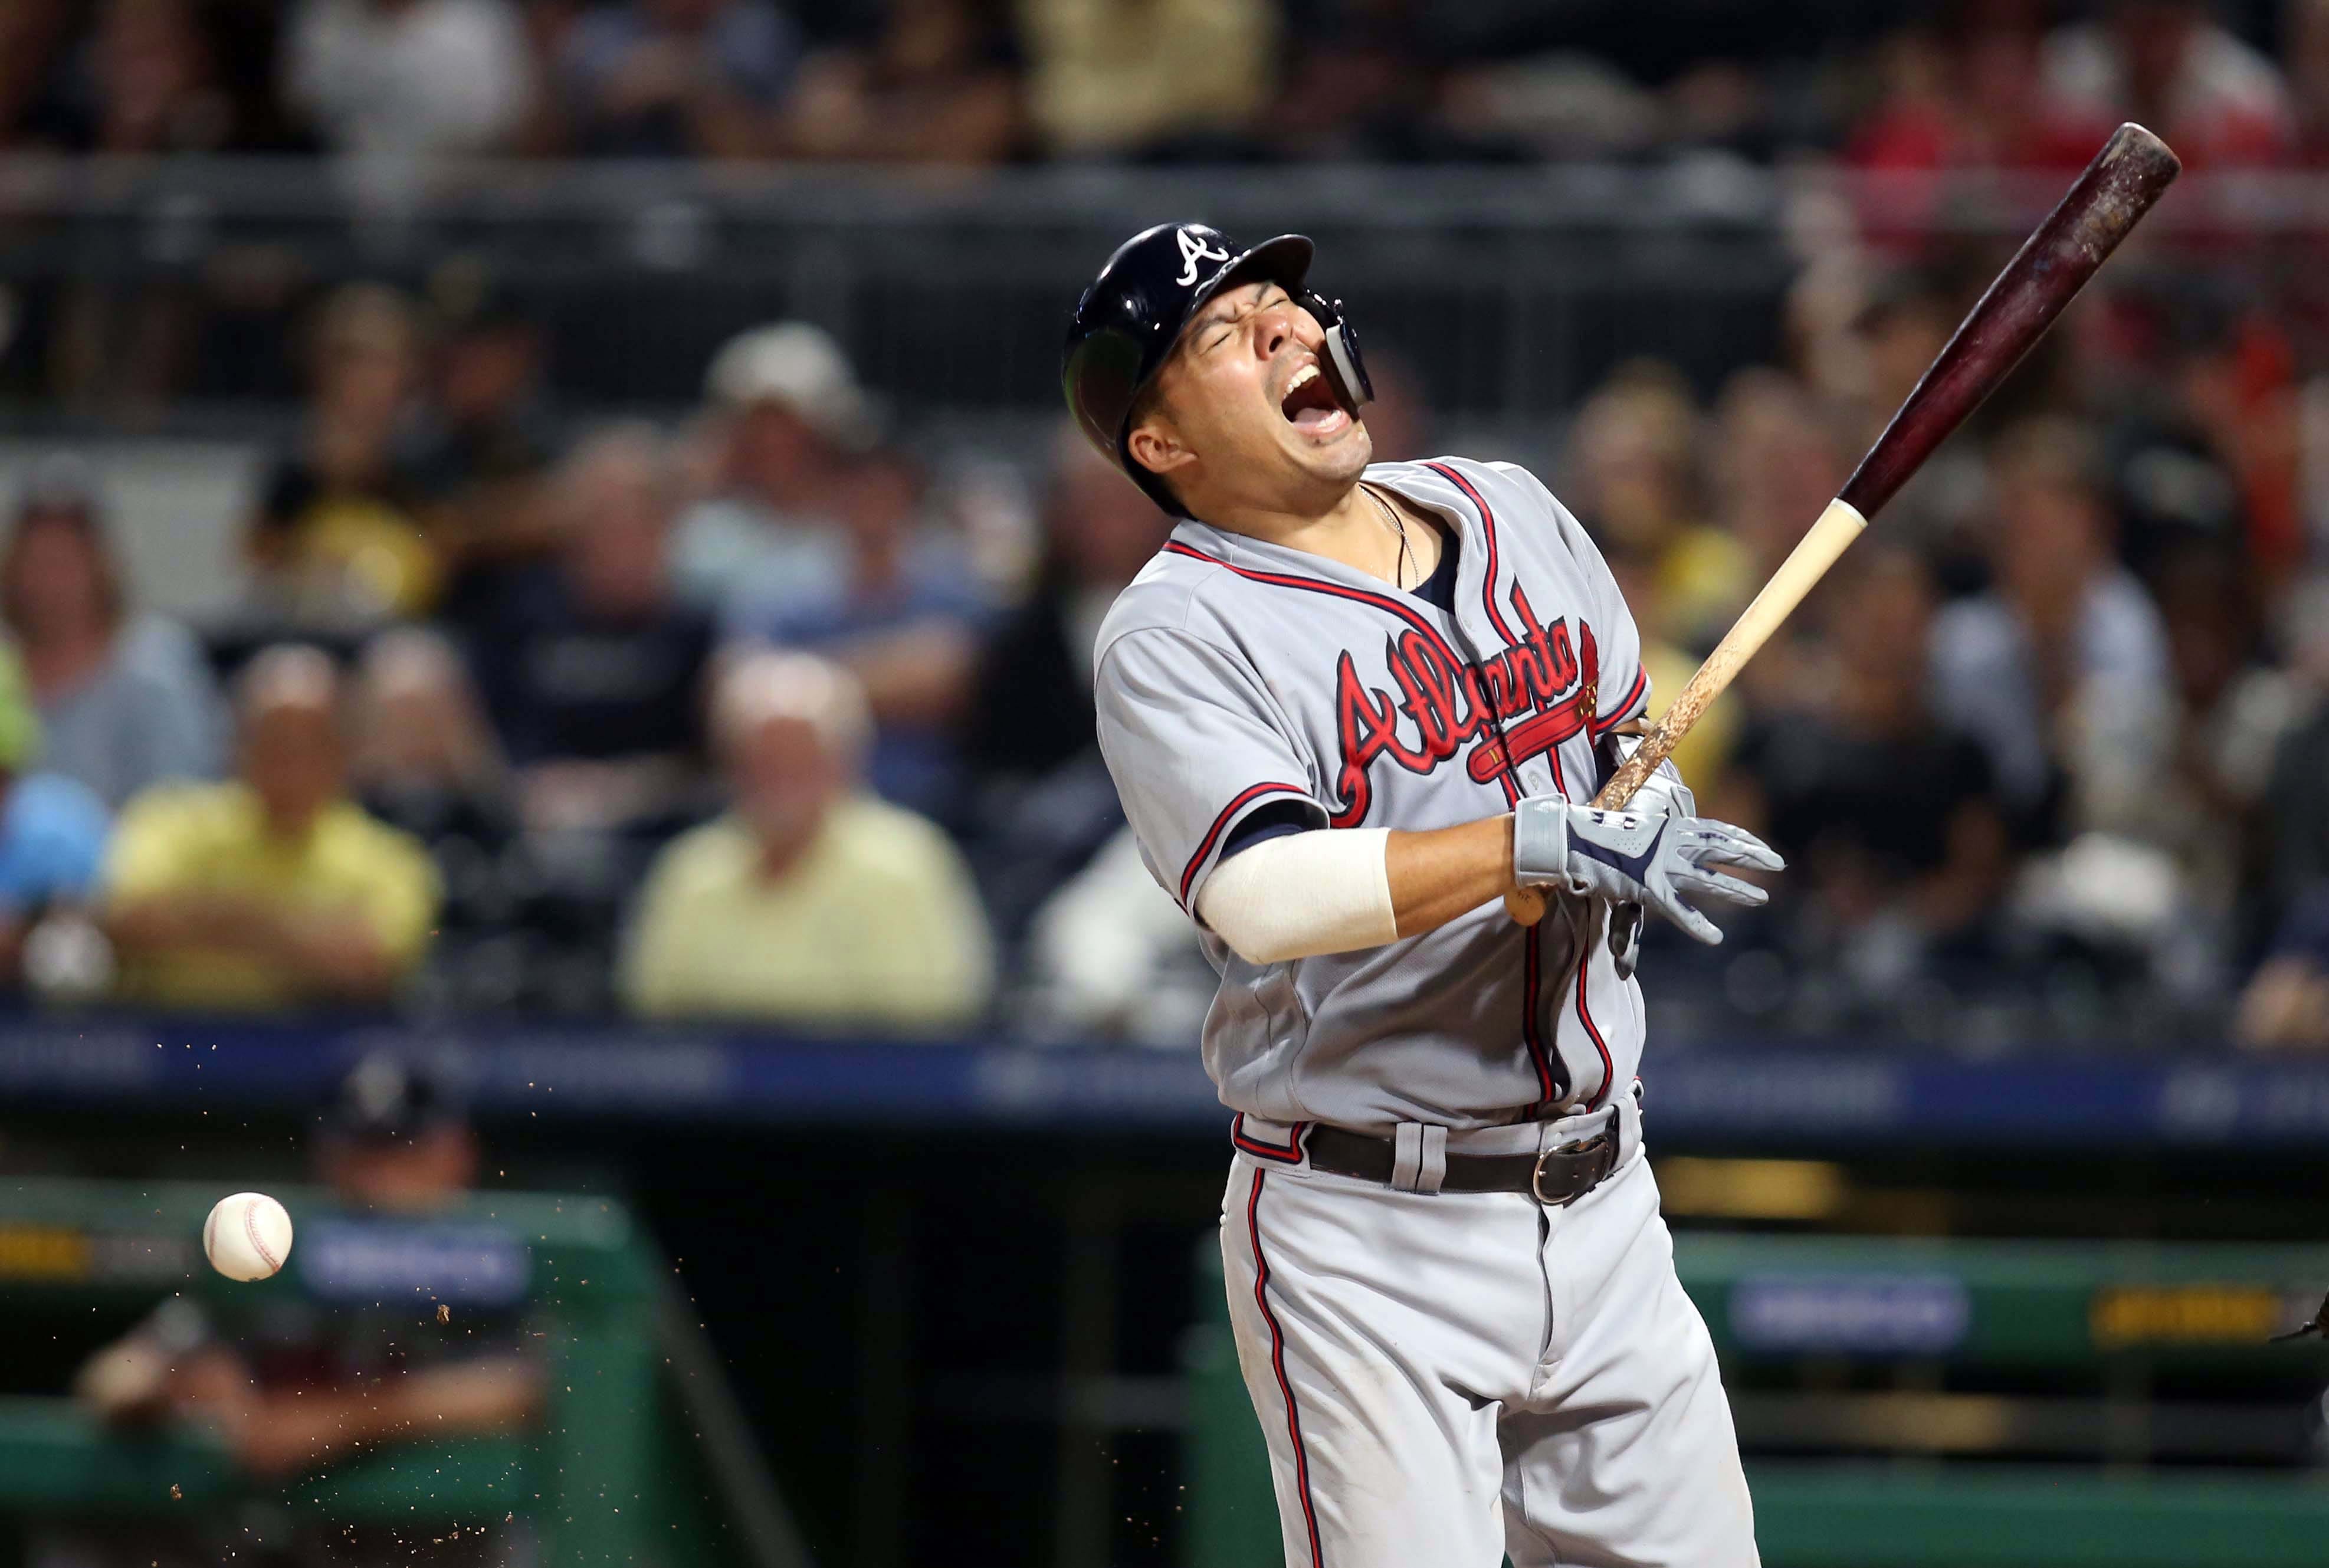 Atlanta Braves catcher Kurt Suzuki reacts after being hit by a pitch from the Pittsburgh Pirates during the ninth inning at PNC Park in Pittsburgh. The Braves won 6-1.